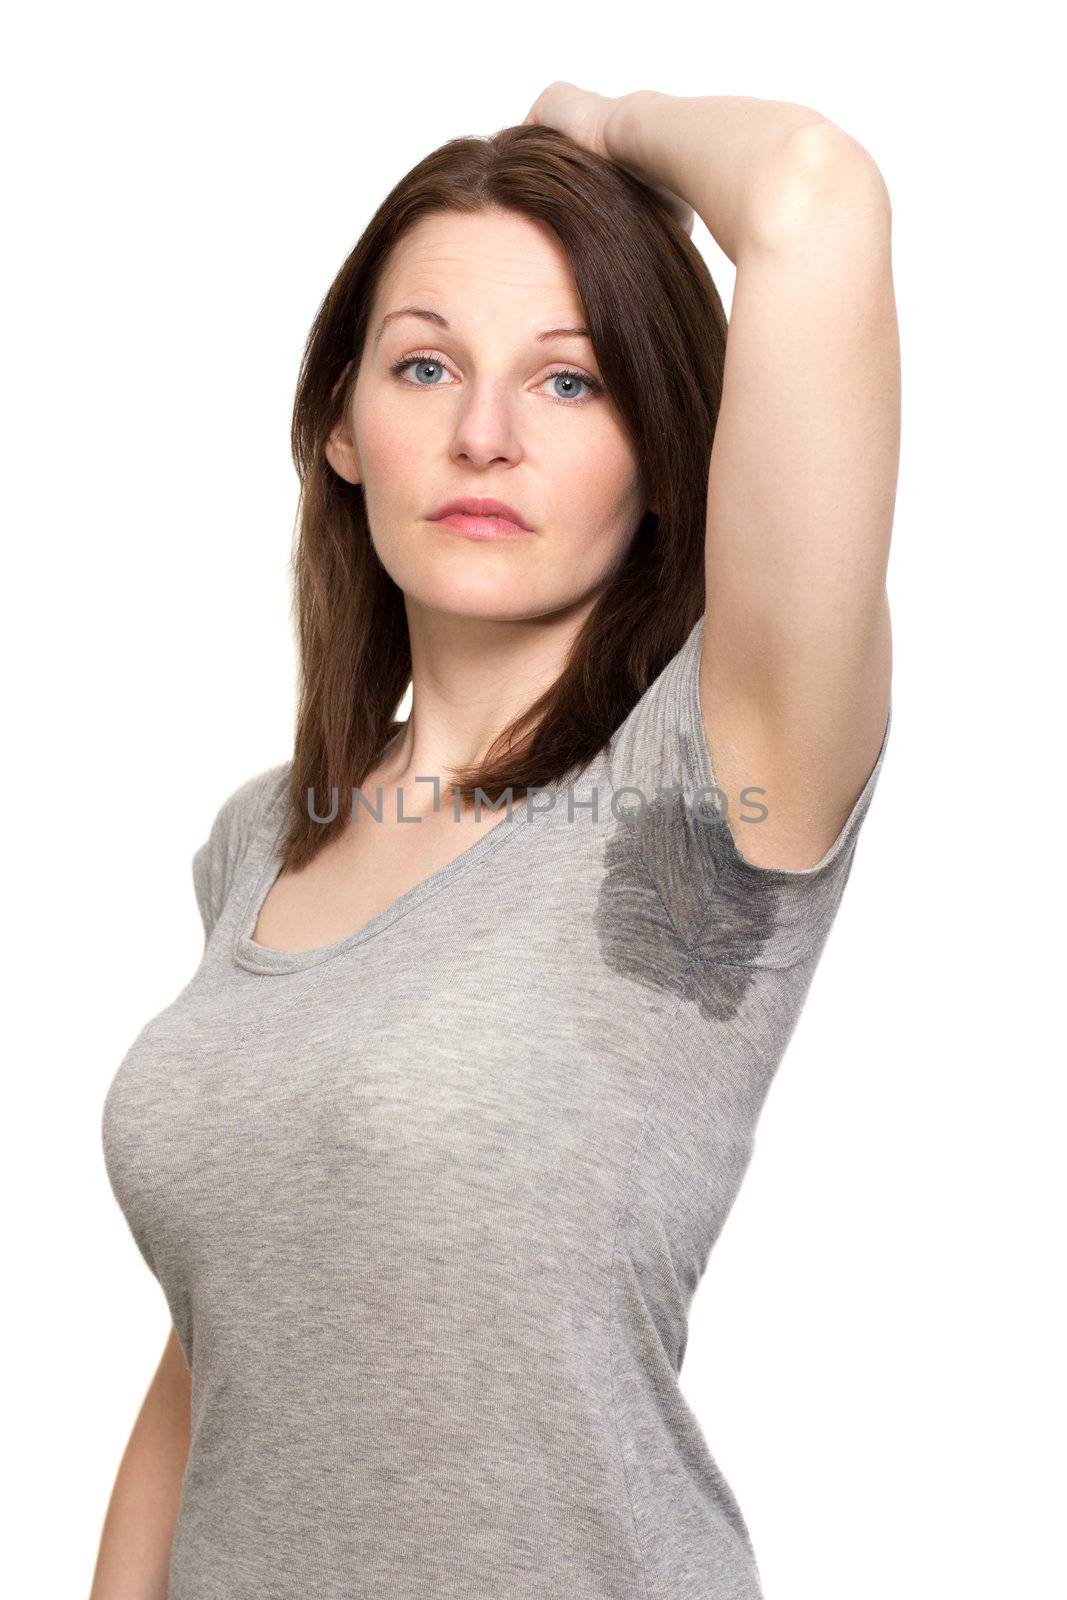 Woman sweating very badly under armpit by dwaschnig_photo